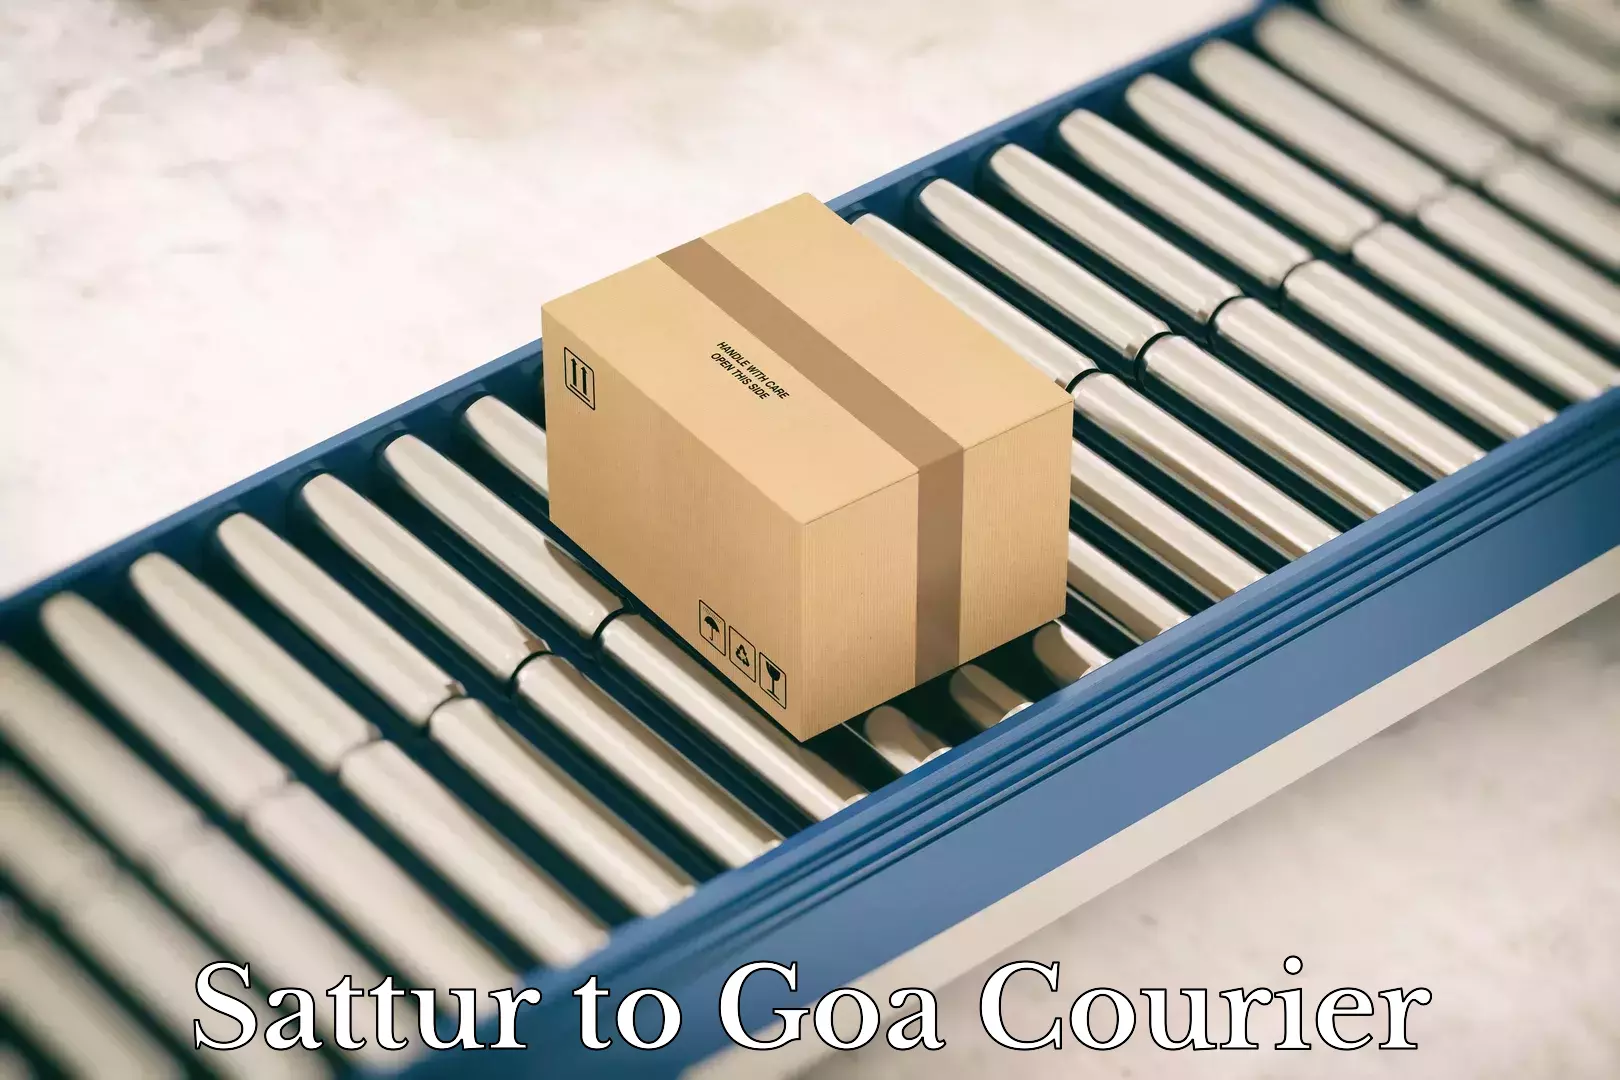 Comprehensive delivery network Sattur to Goa